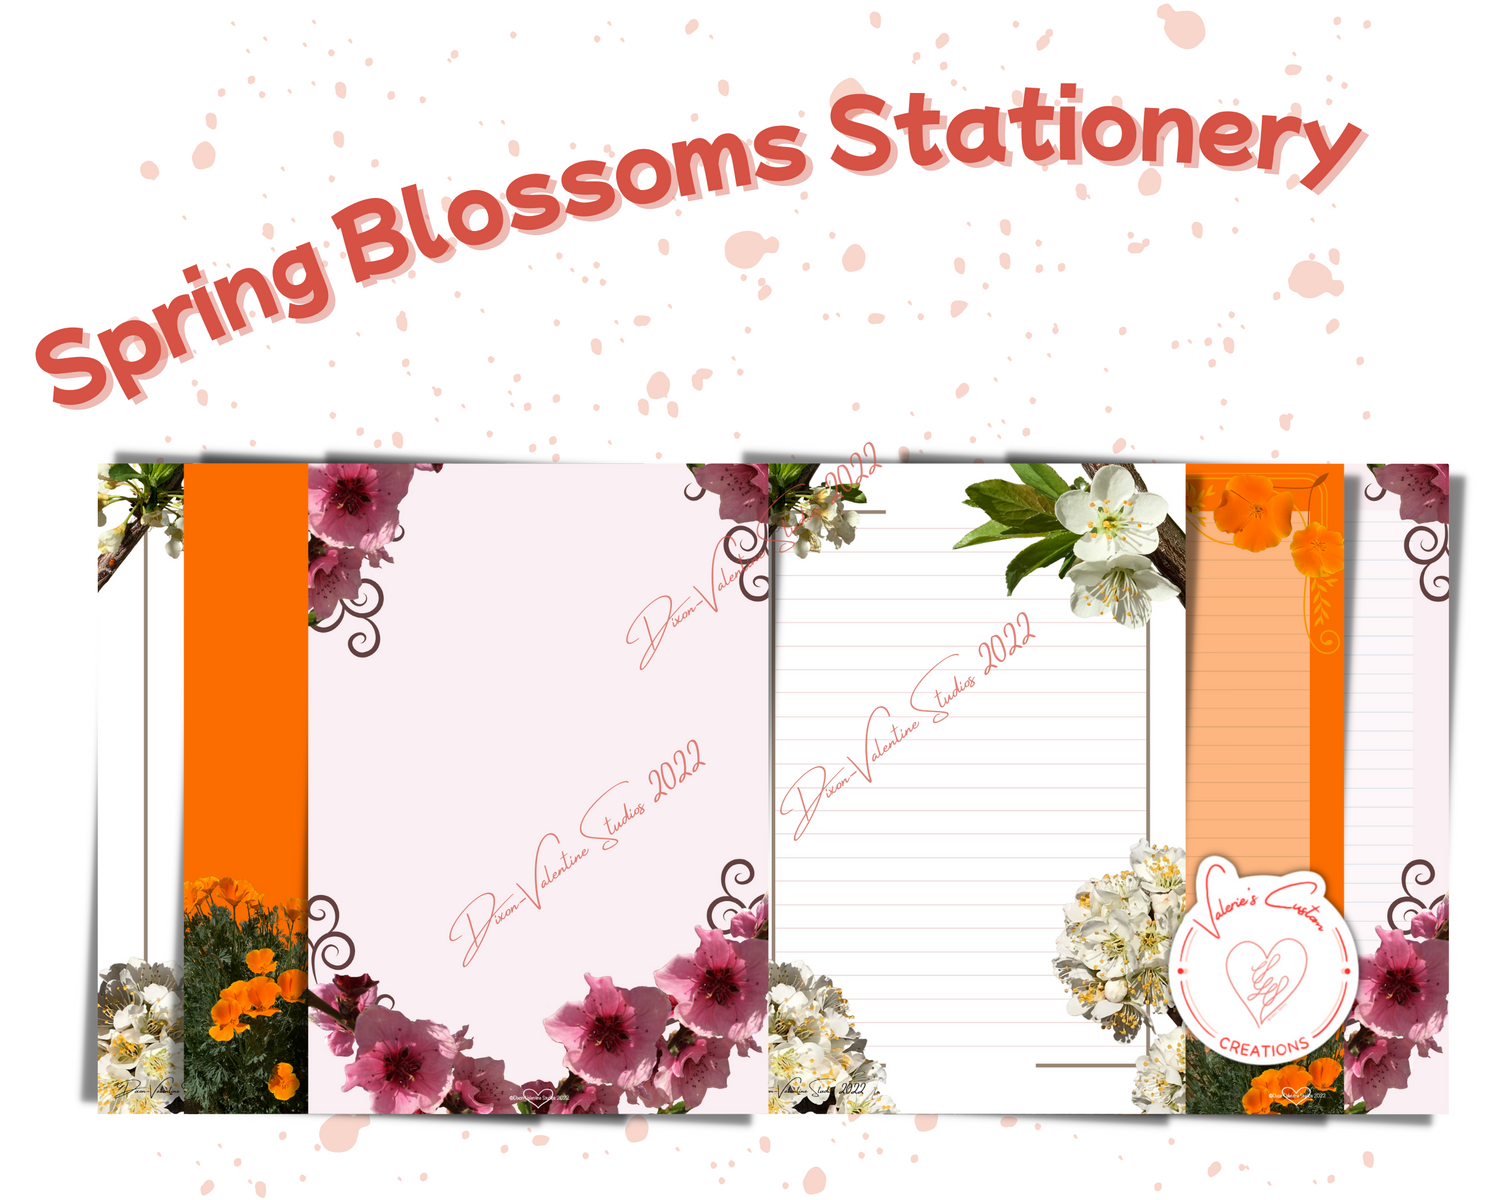 Spring Blossoms Stationery